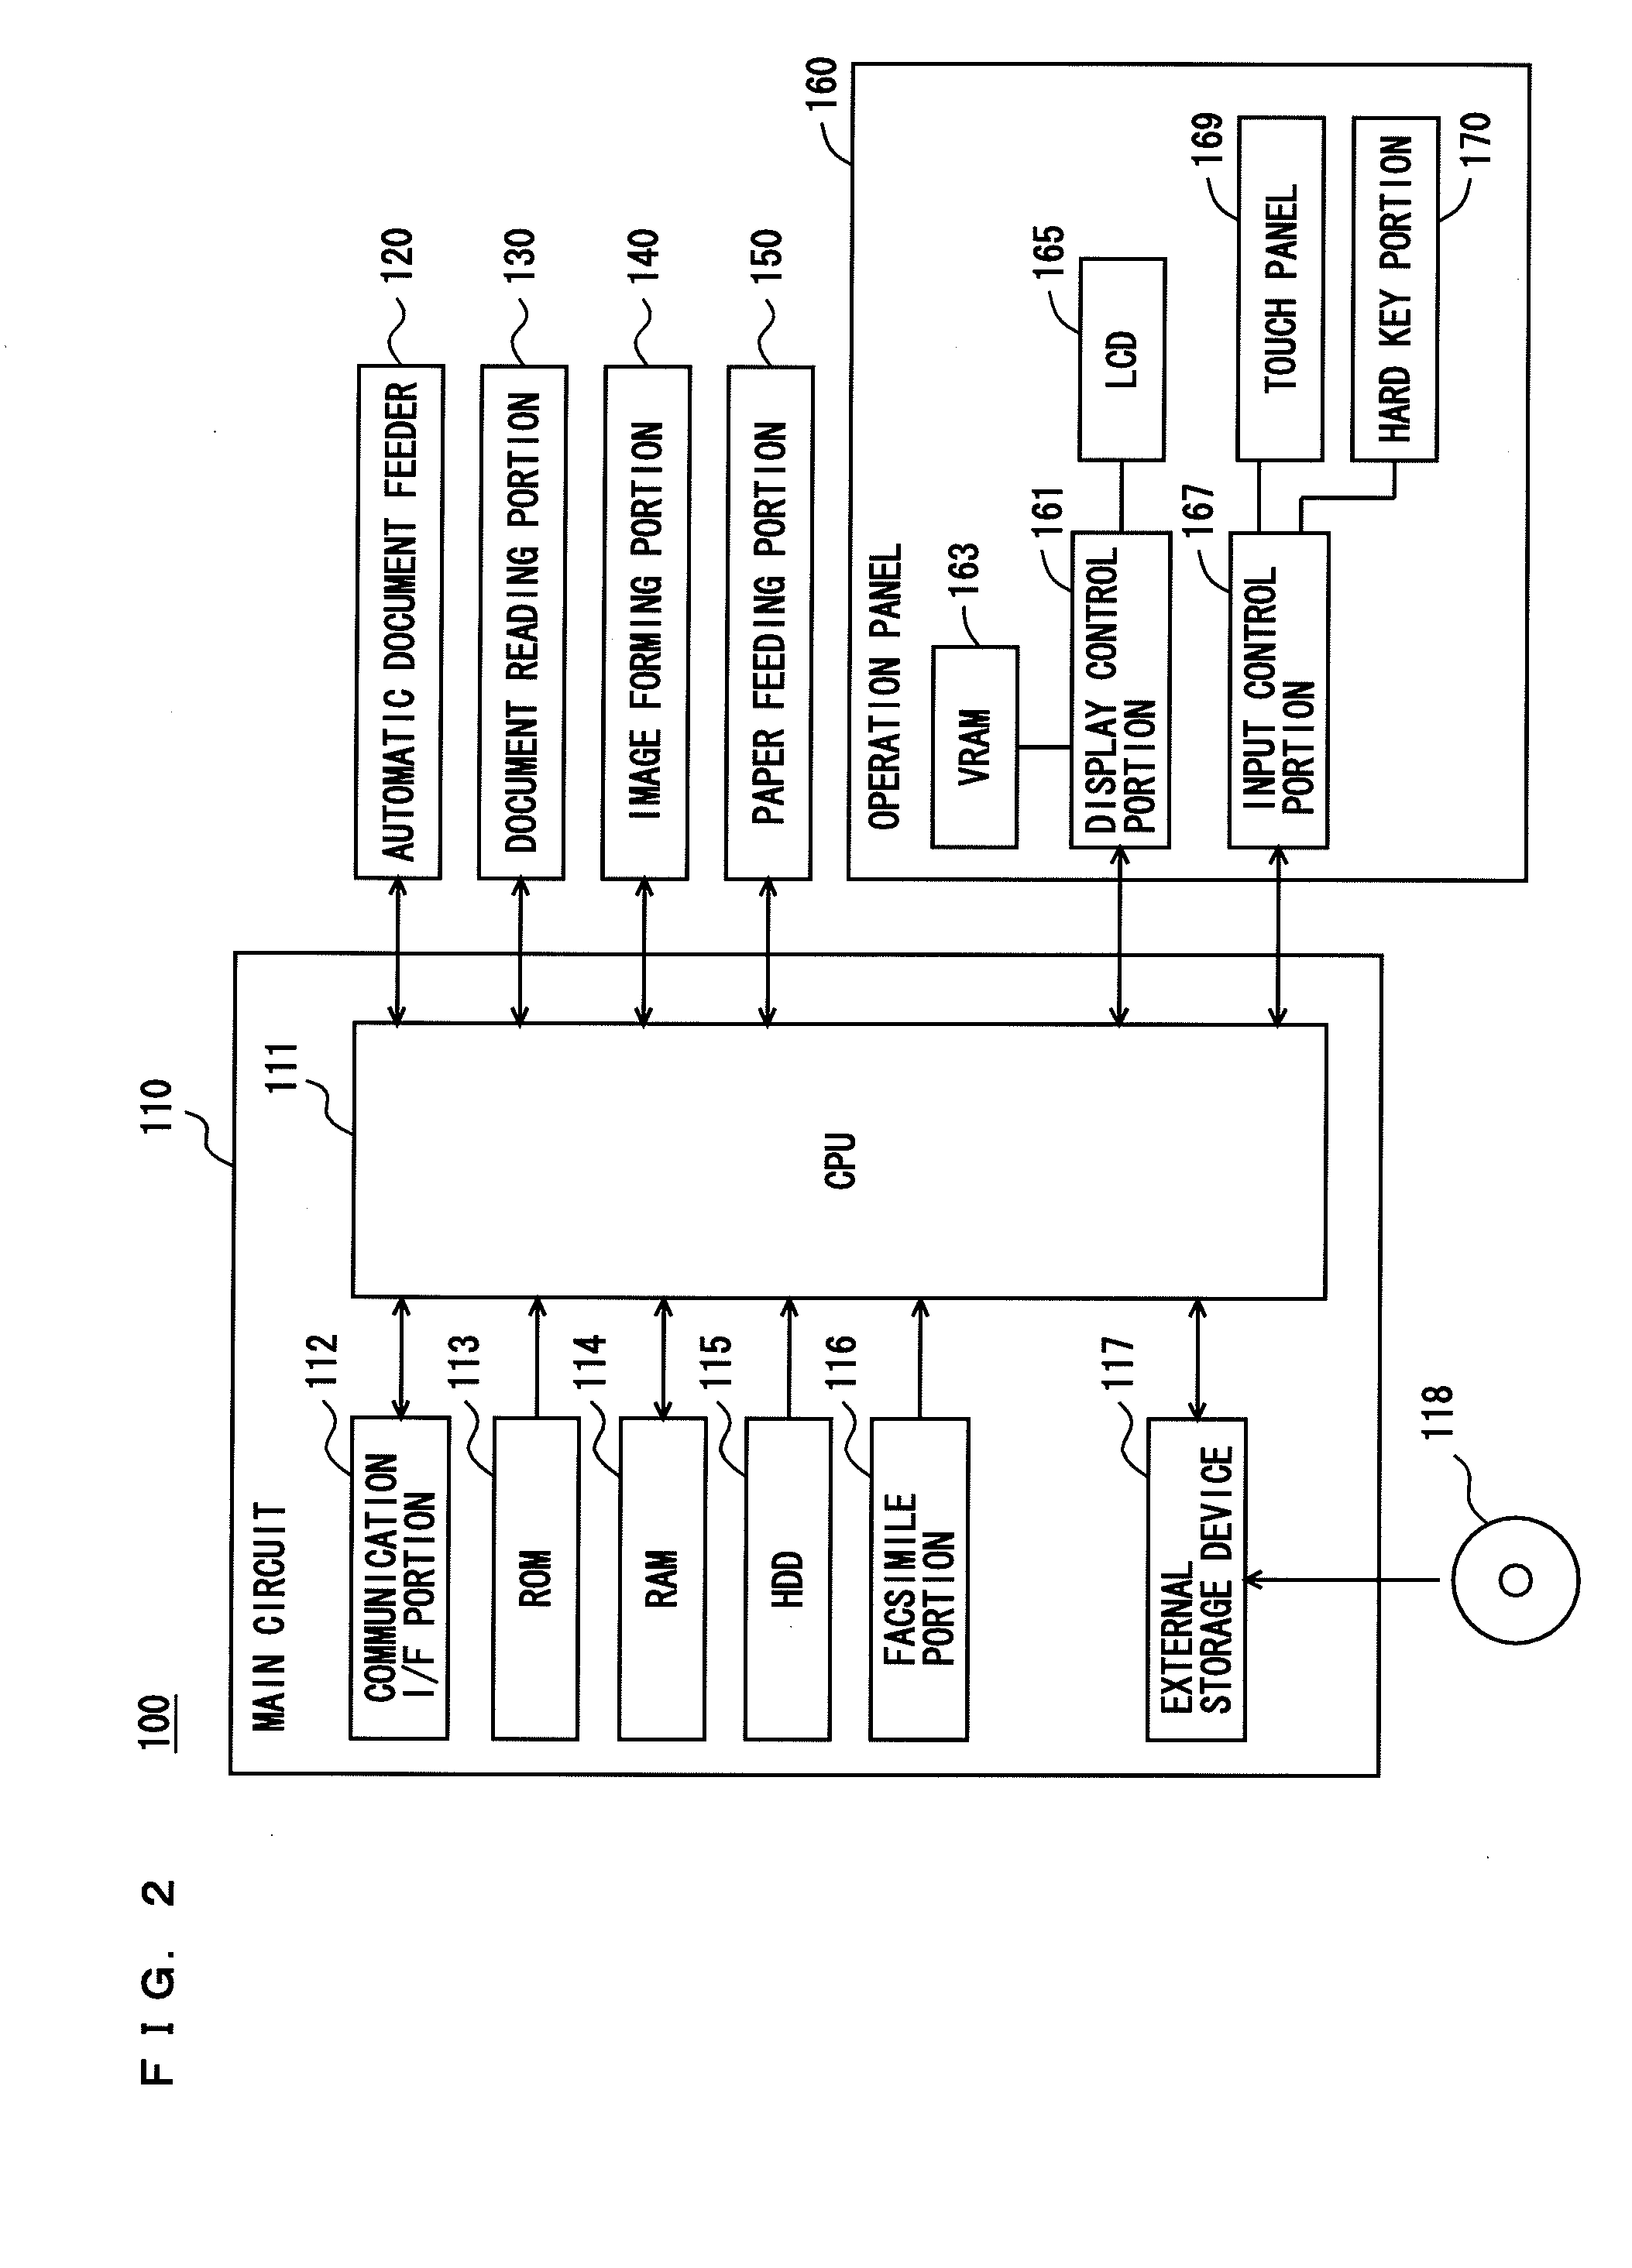 Image forming apparatus, display method, and non-transitory computer-readable recording medium encoded with display program